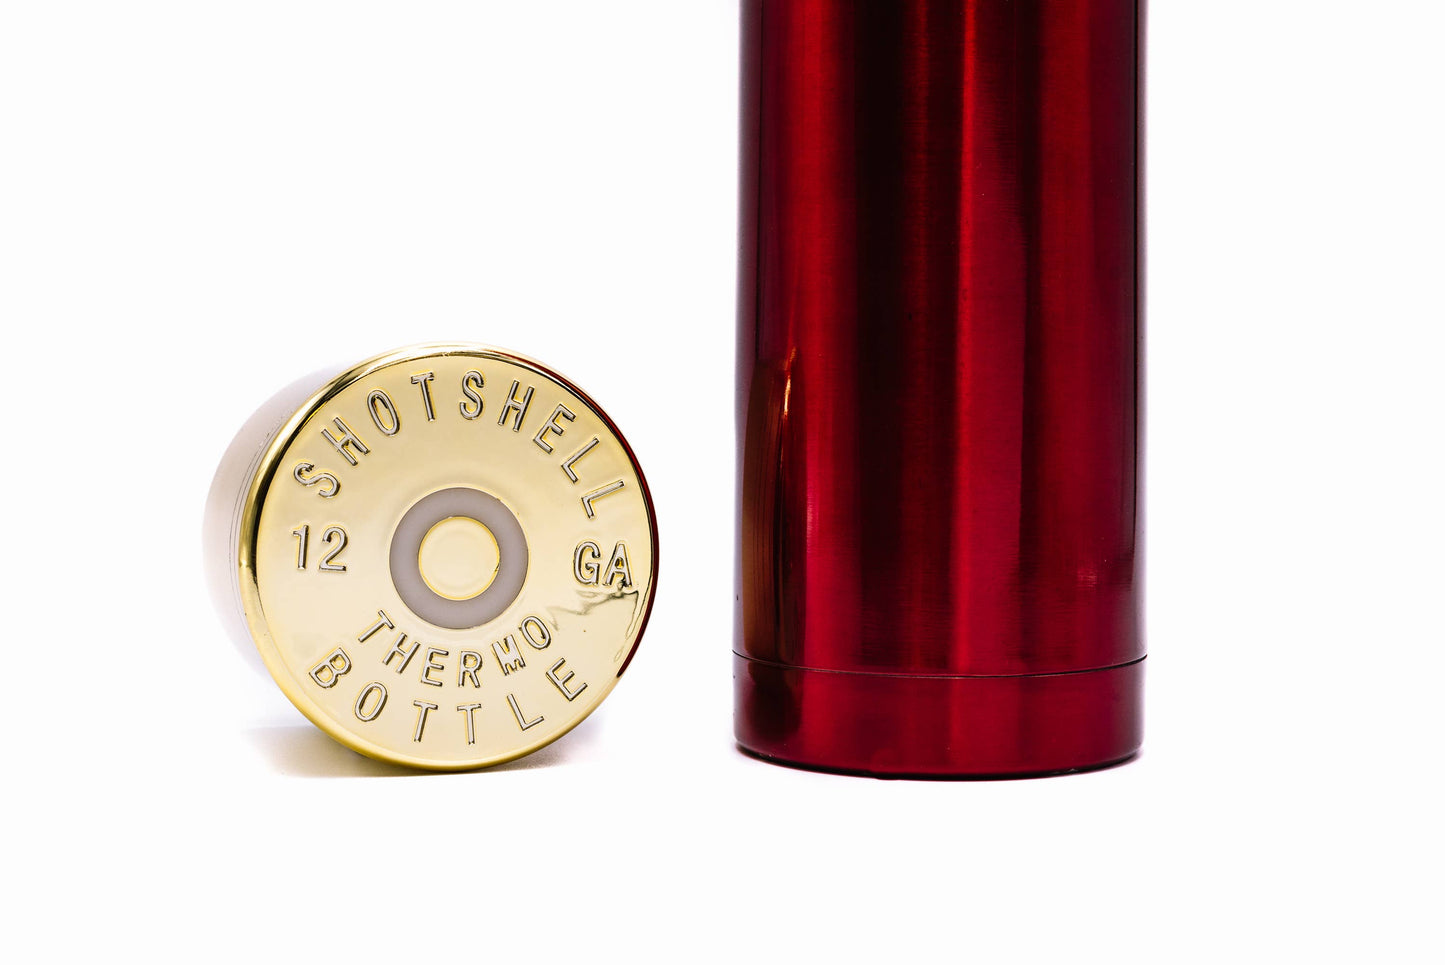 Shotgun Shell Red Thermo Bottle 1 Liter 13" Tall Insulated